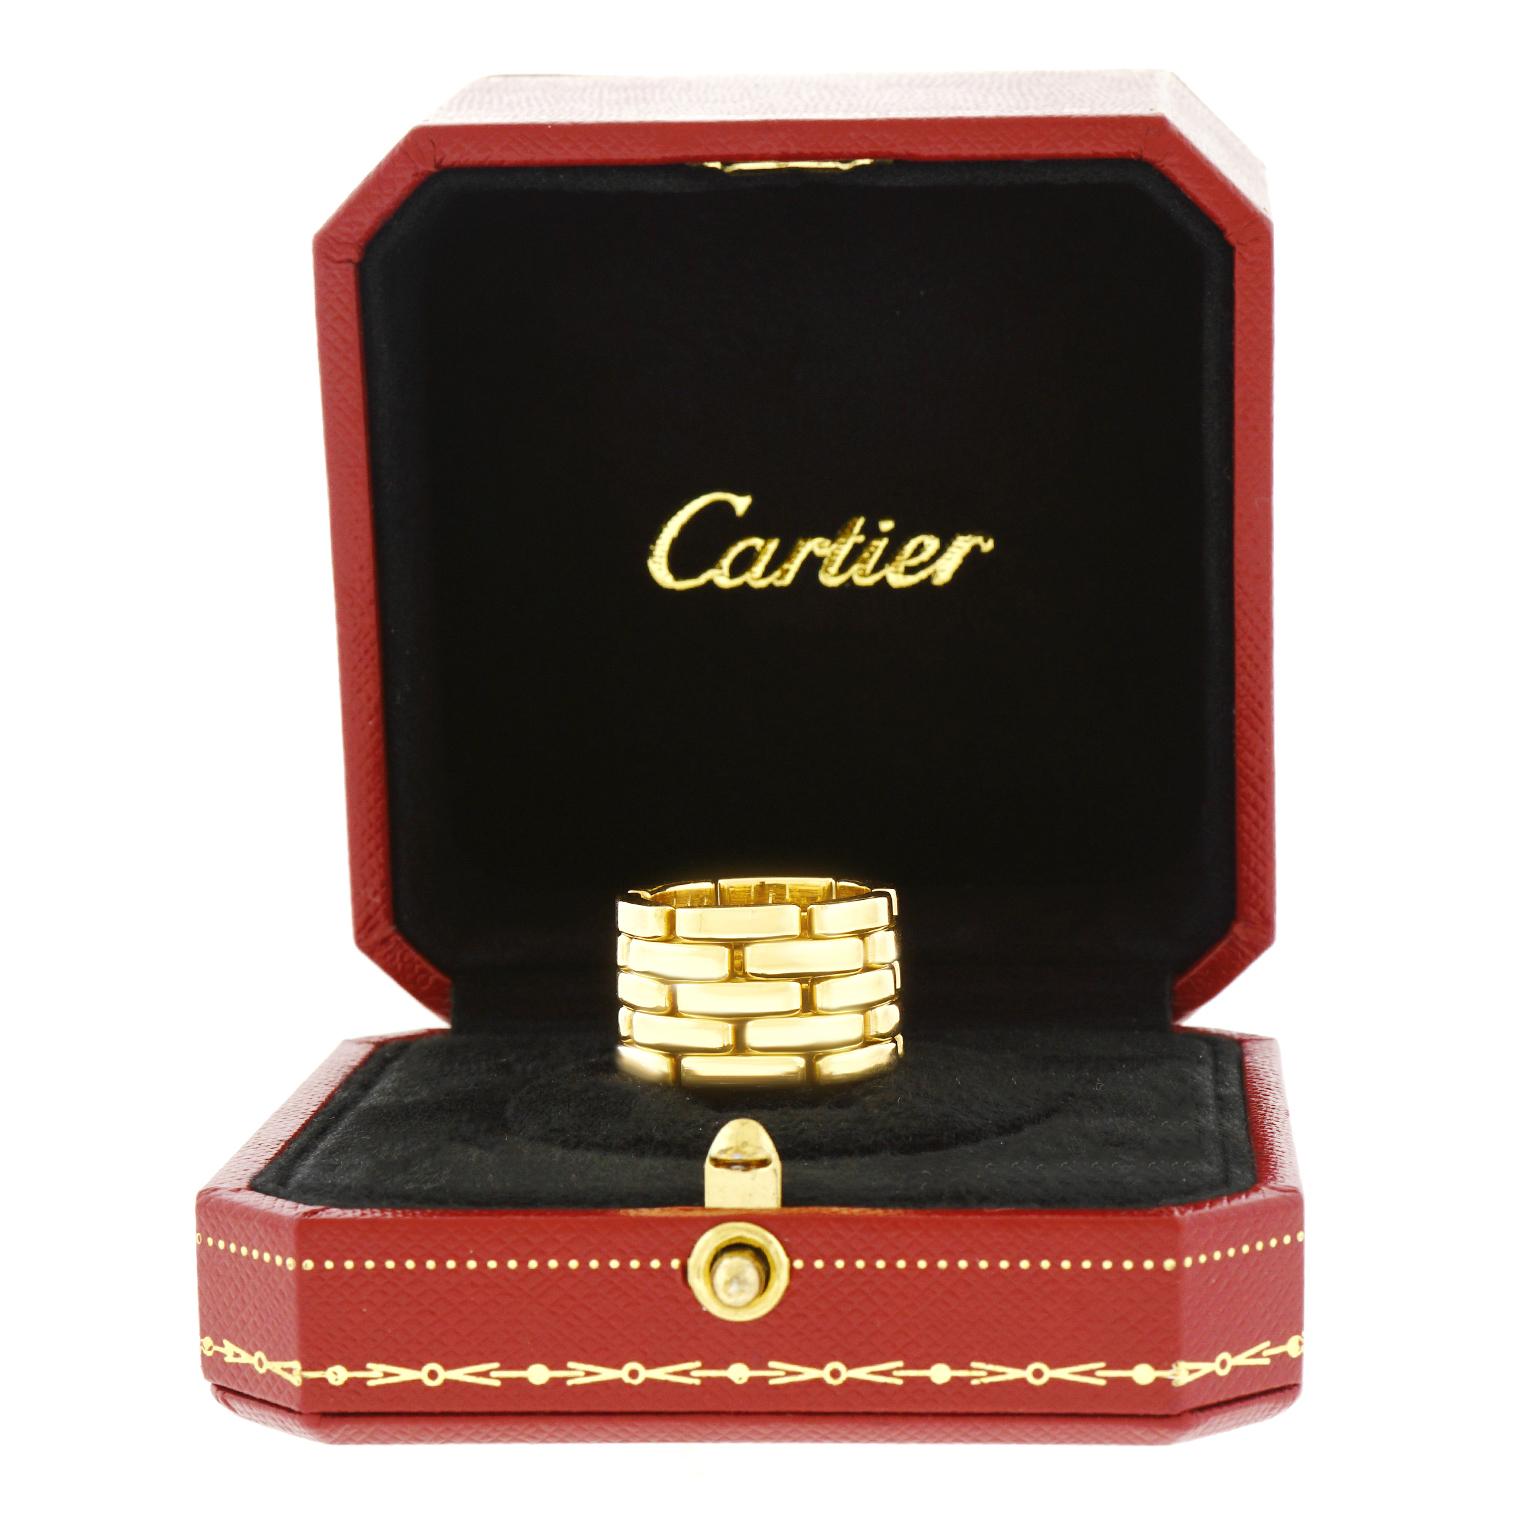 Cartier “Maillon Panthere” Ring 1